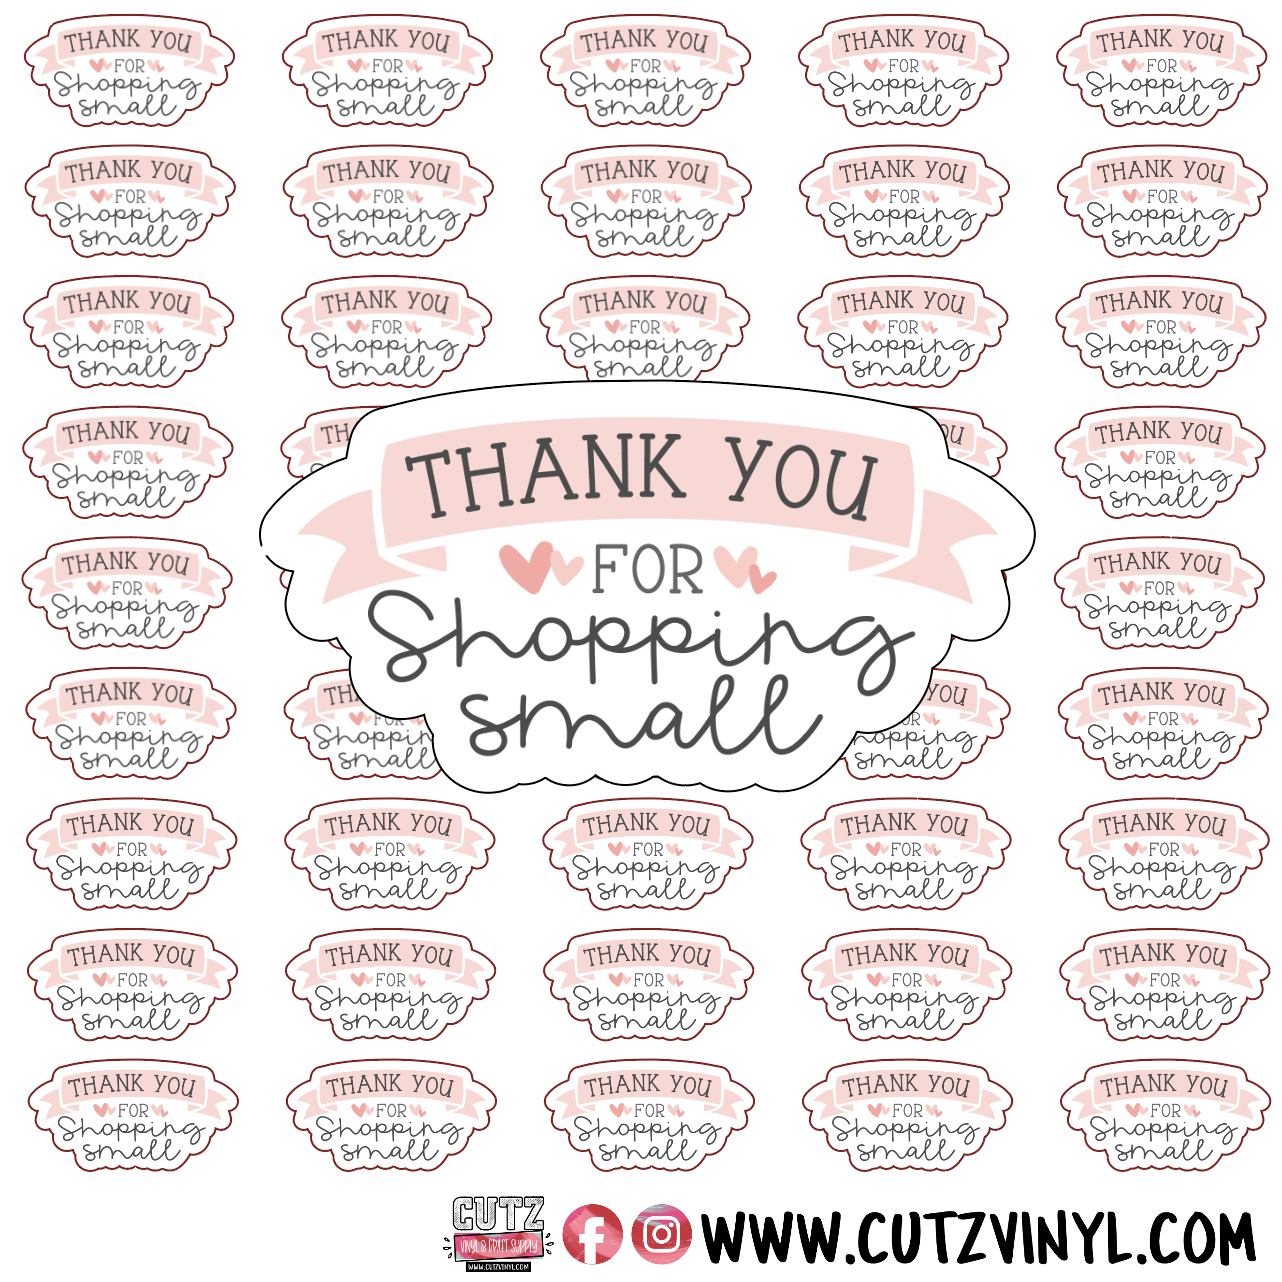 Thank You for Shopping Small pink ribbon